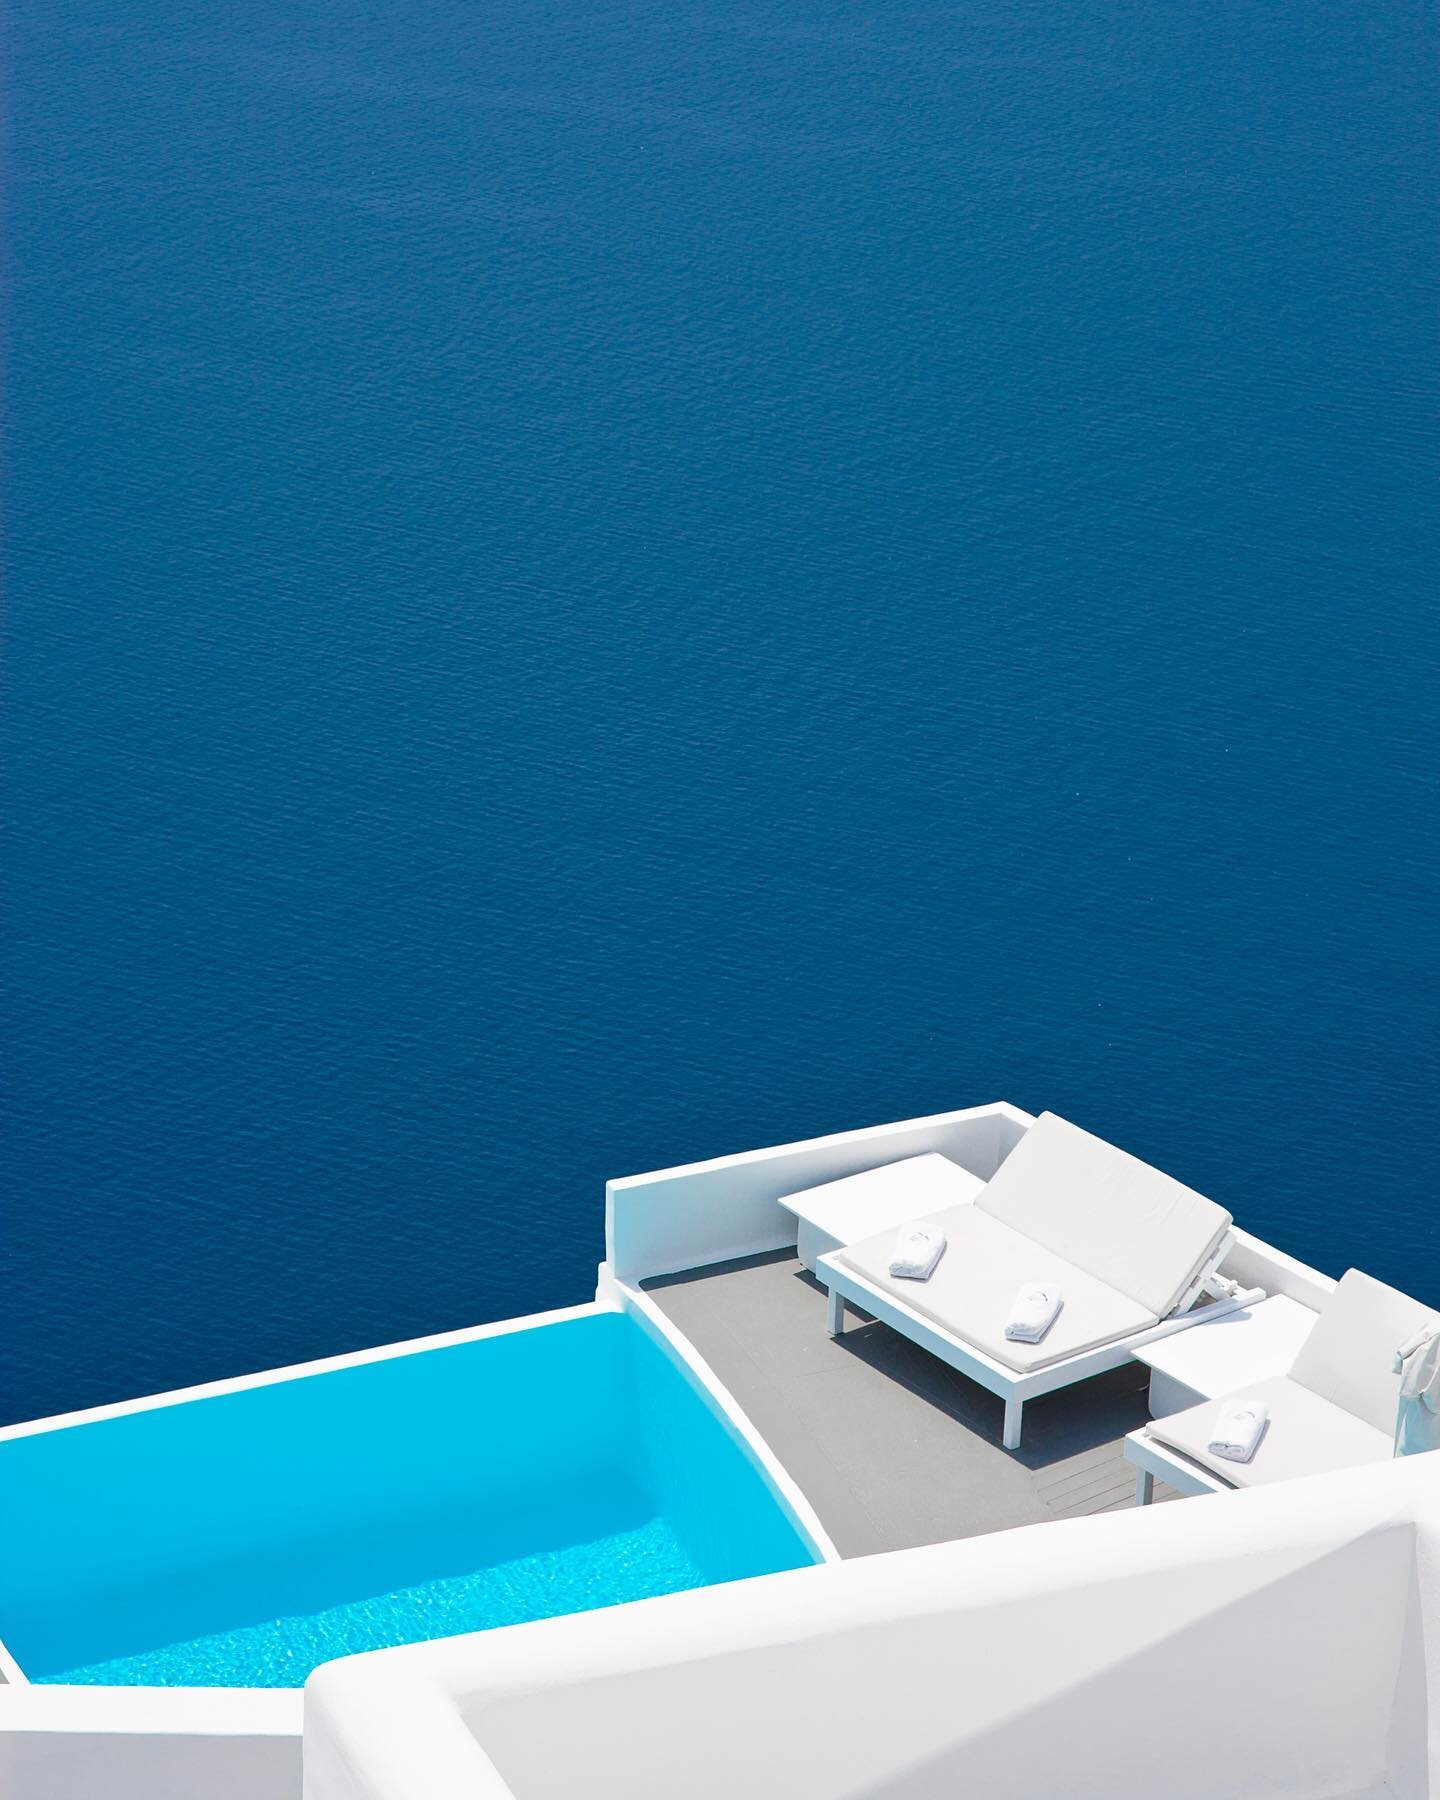 Book either of our VIP Partners Katikies Santorini or Katikies Mykonos by end of May for dates through the end of the year and receive 15% off!⁣
⁣👇⁣
Find your kefi at Katikies, a collection of luxury hotels throughout Santorini and Mykonos. ⁣⁣⁣⁣
🇬?